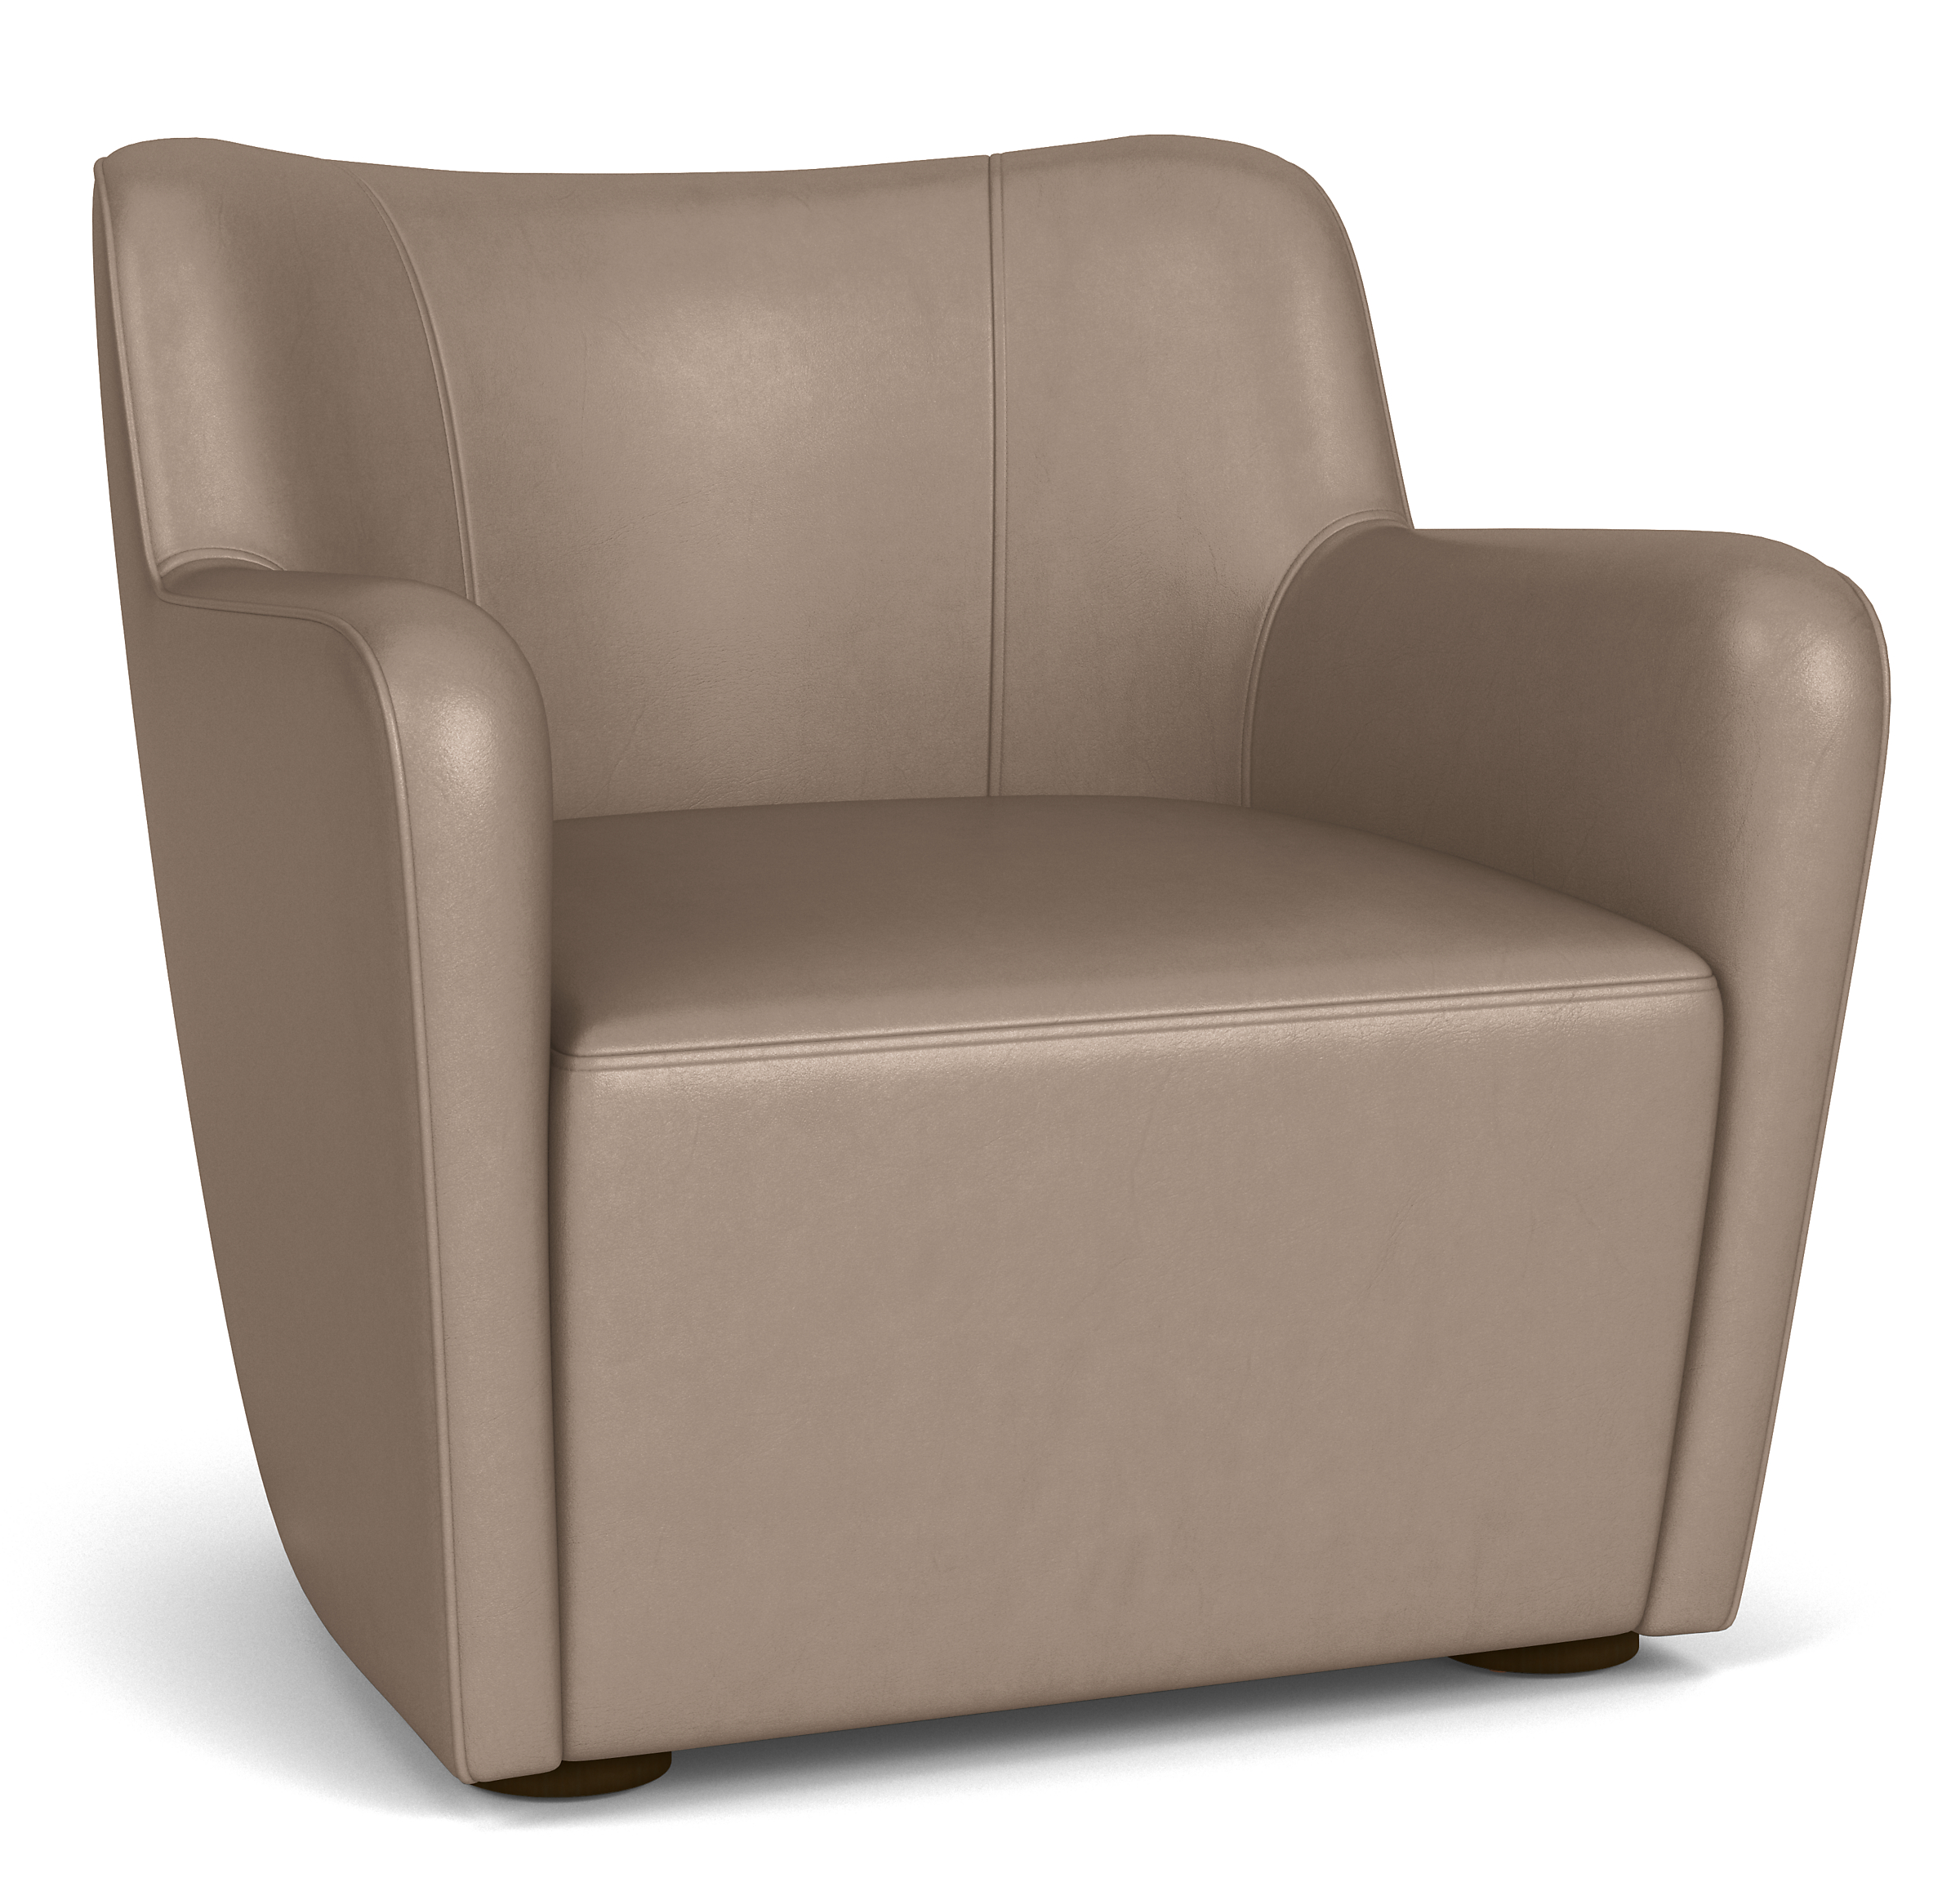 Lily Chair in Urbino Stone Leather